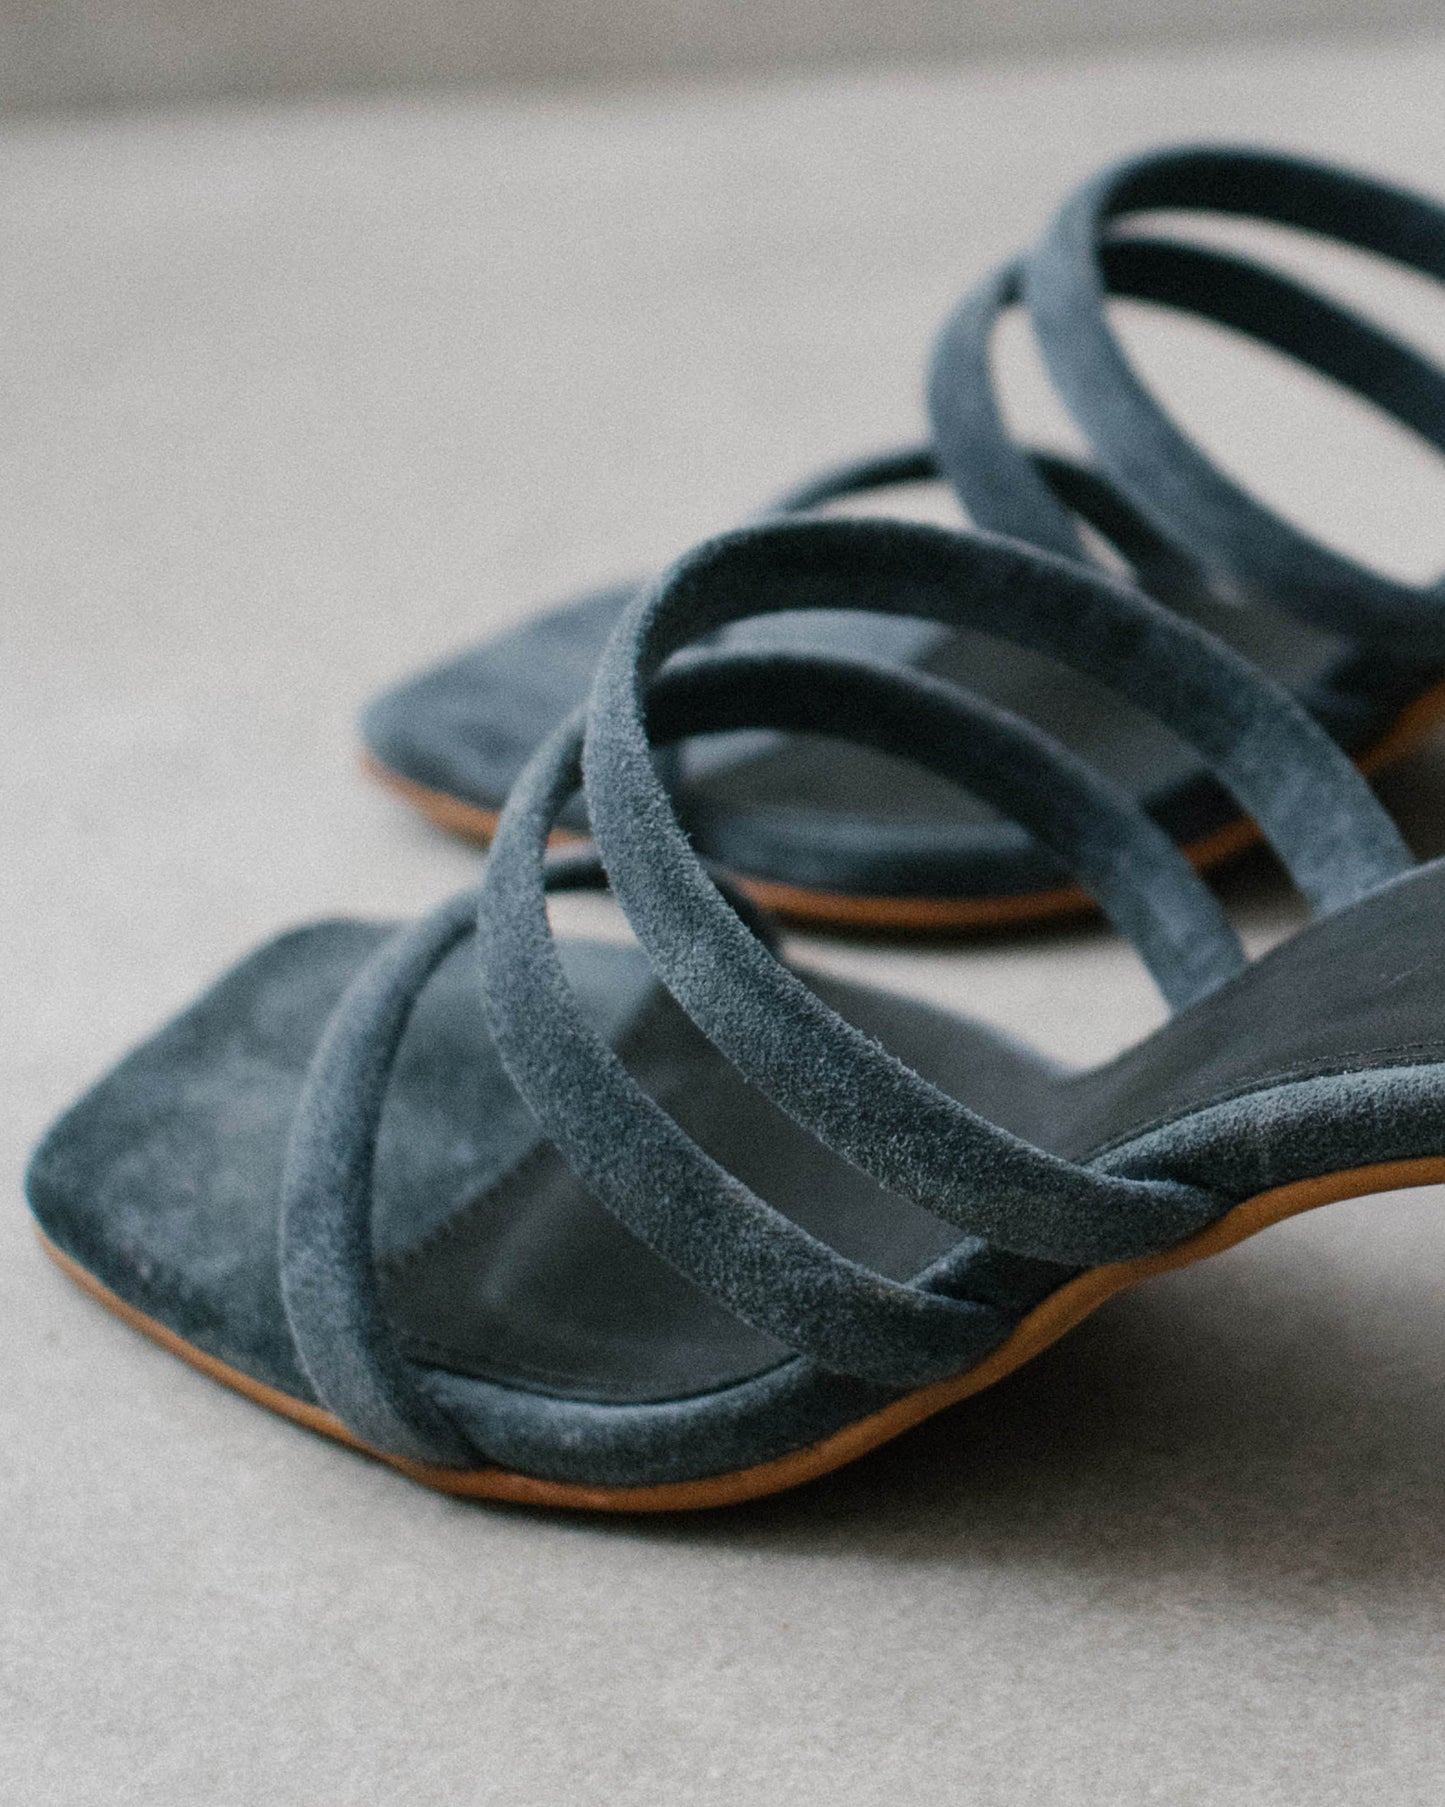 The Indiana Gray are the staple of the summer season. Defined by a minimalistic and timeless design, these suede sandals feature a curved block heel, one strap at the front and two parallel straps between the ankle and the instep, as well as a square toe for maximum flattery.